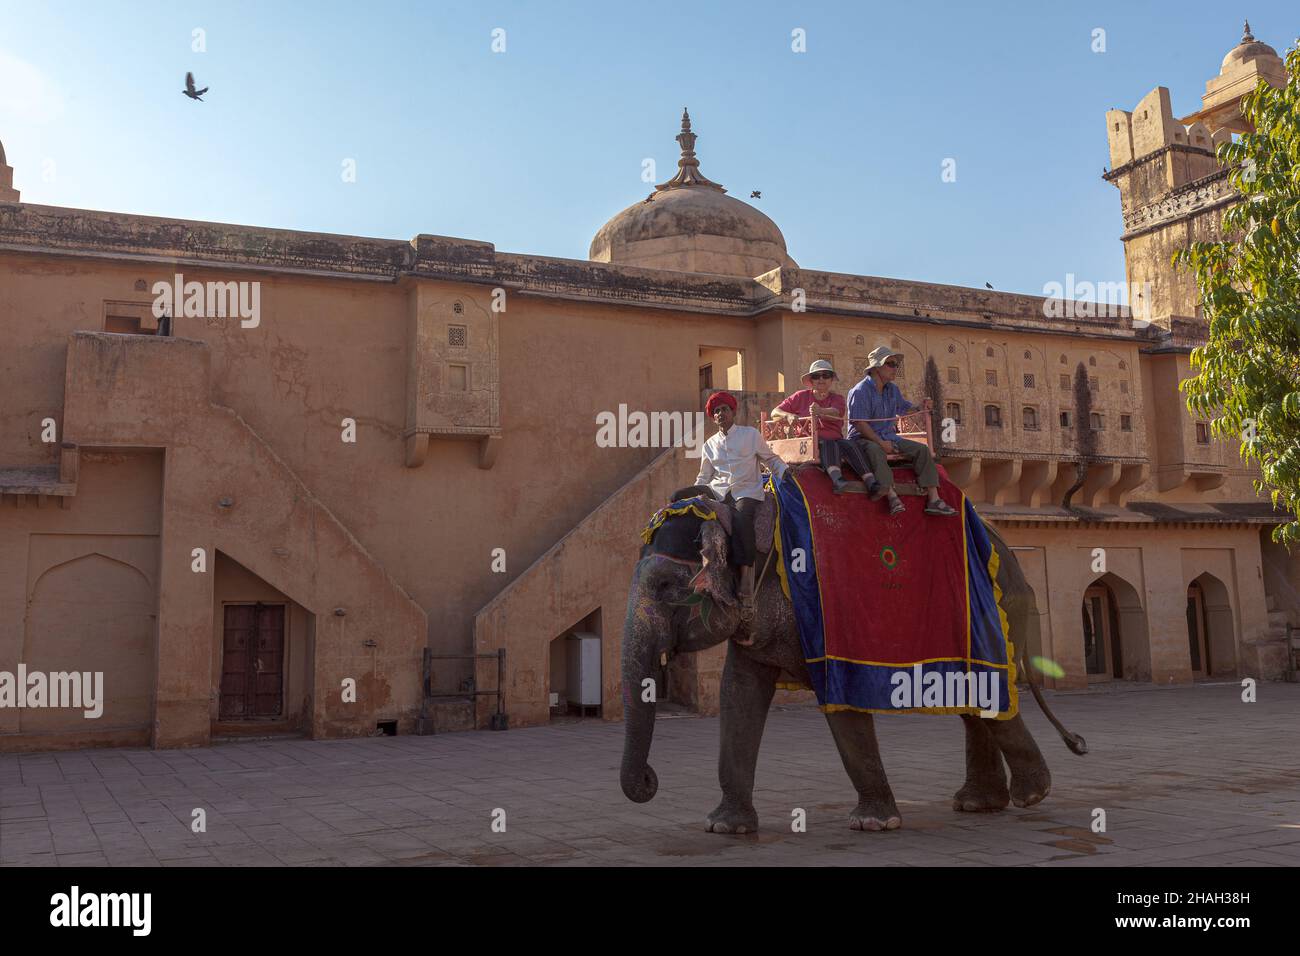 Amber fort and elephants in Jaipur, India Stock Photo